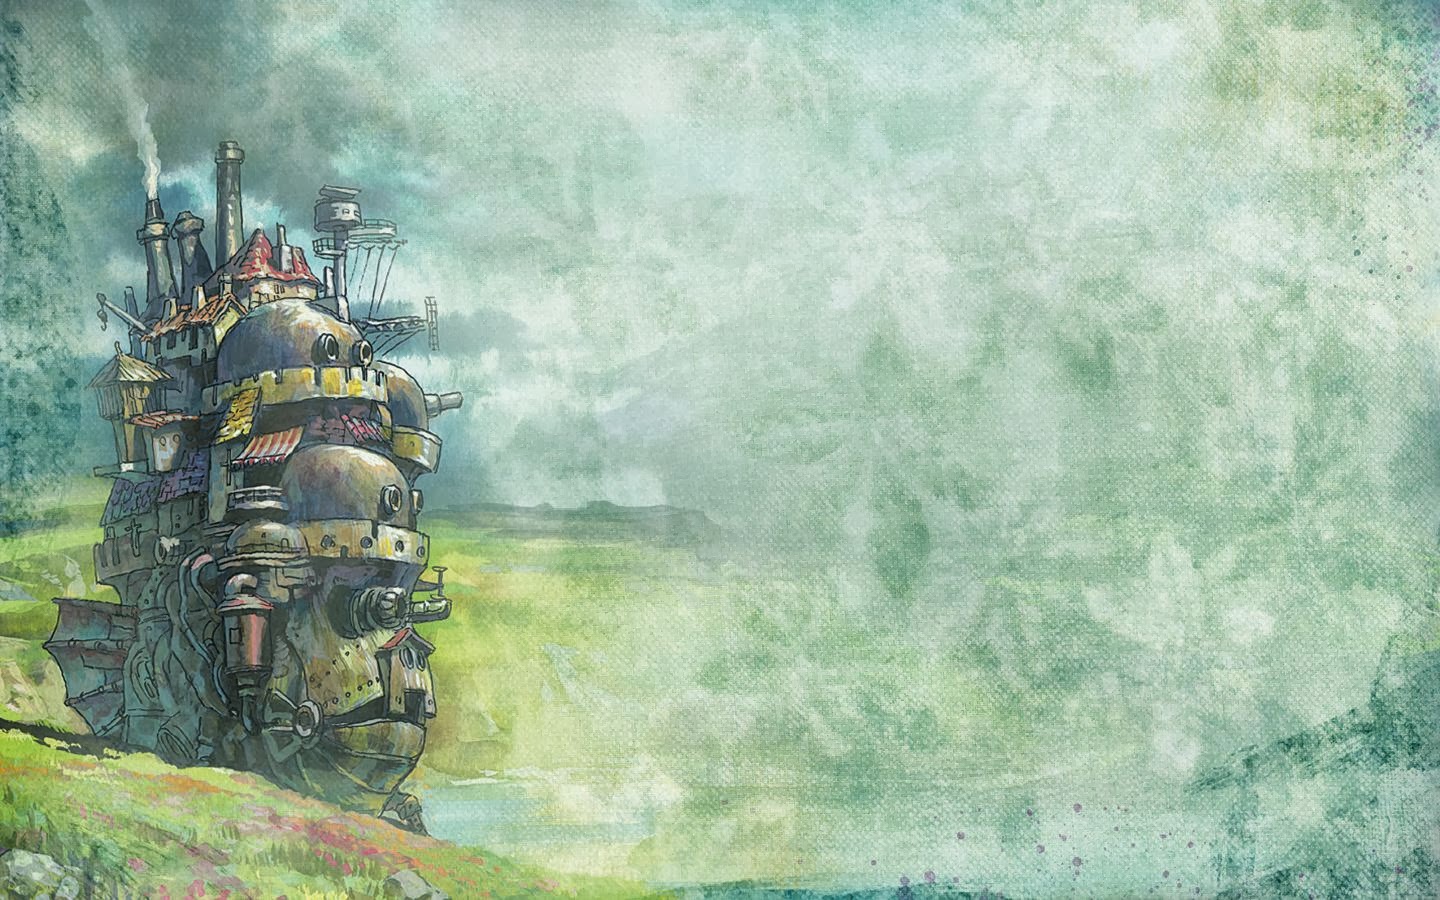 Howls moving castle wallpapers.